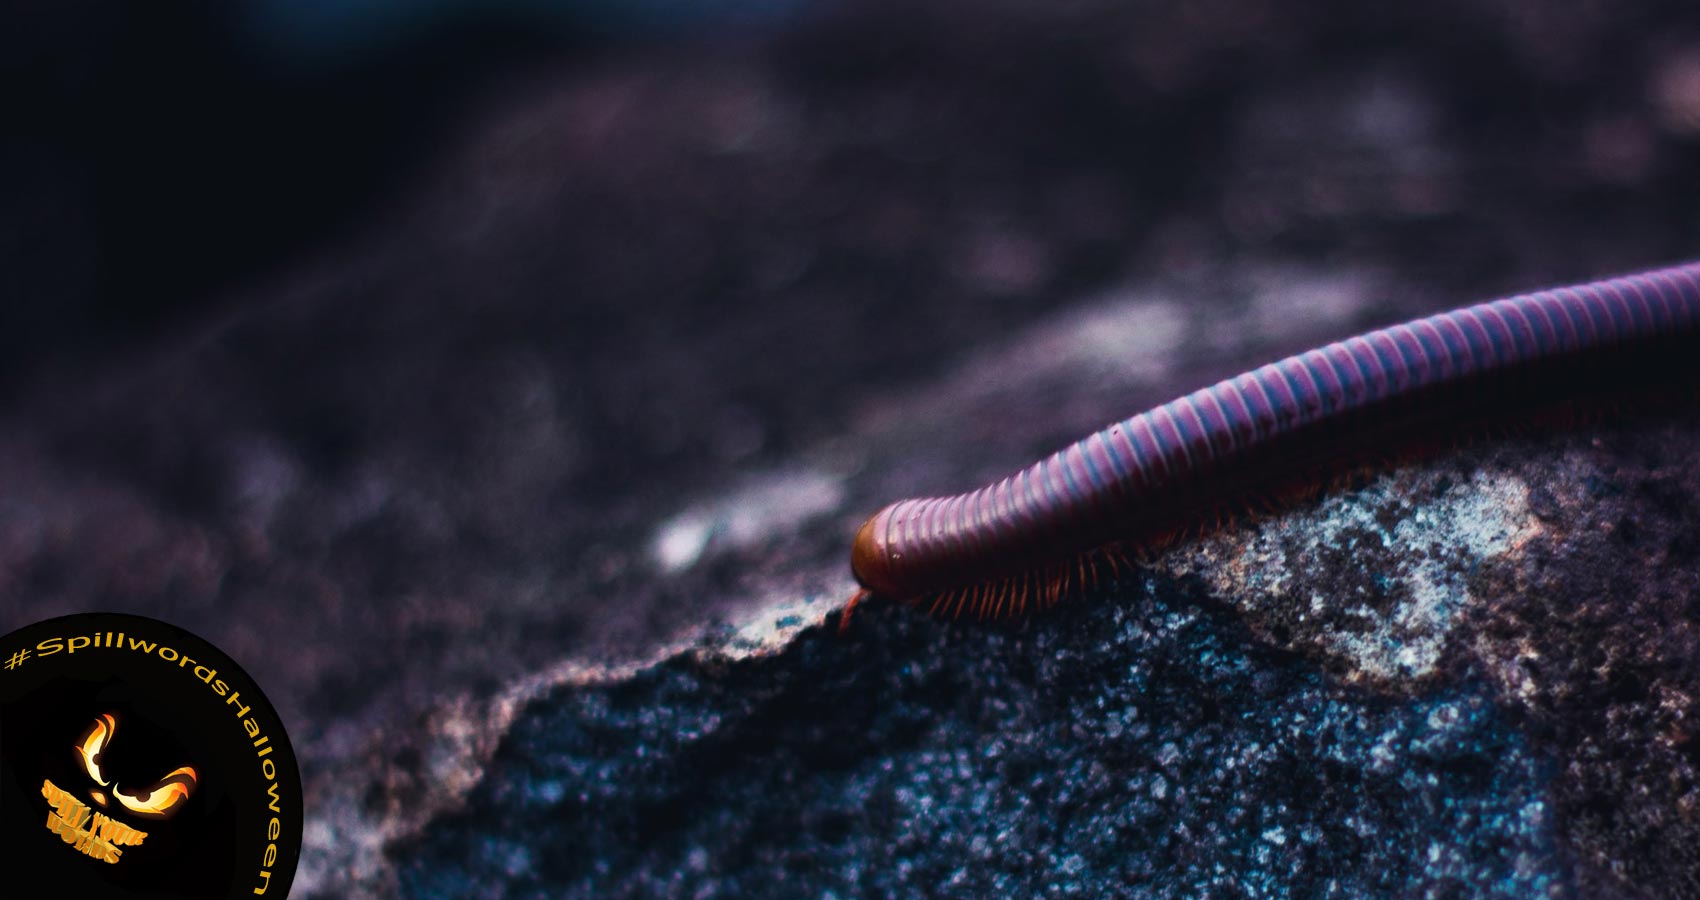 A Groveling of Worms, a poem by Melyssa G. Sprott at Spillwords.com